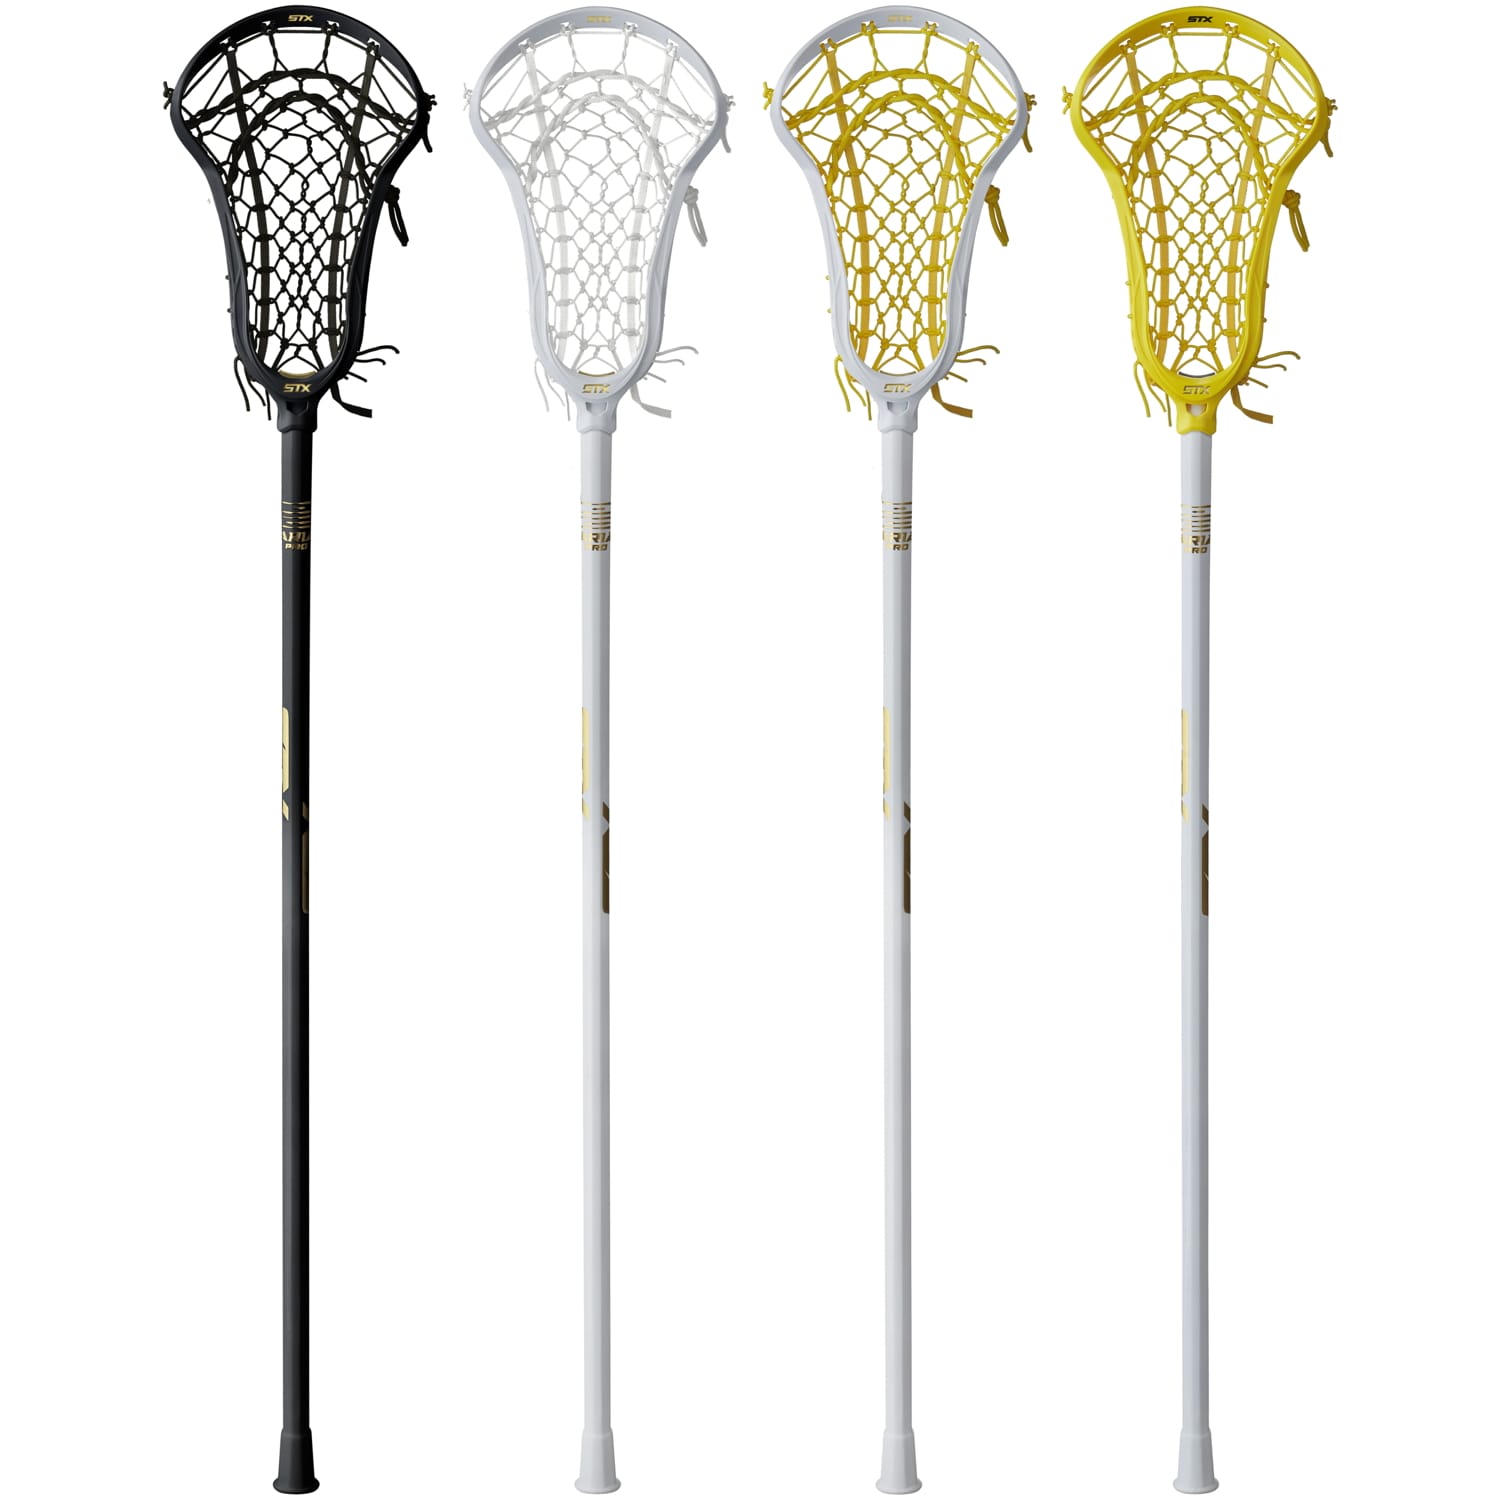 CHAMPRO Lacrosse Stick with Lightweight and Responsive Design for Youth  Athletes